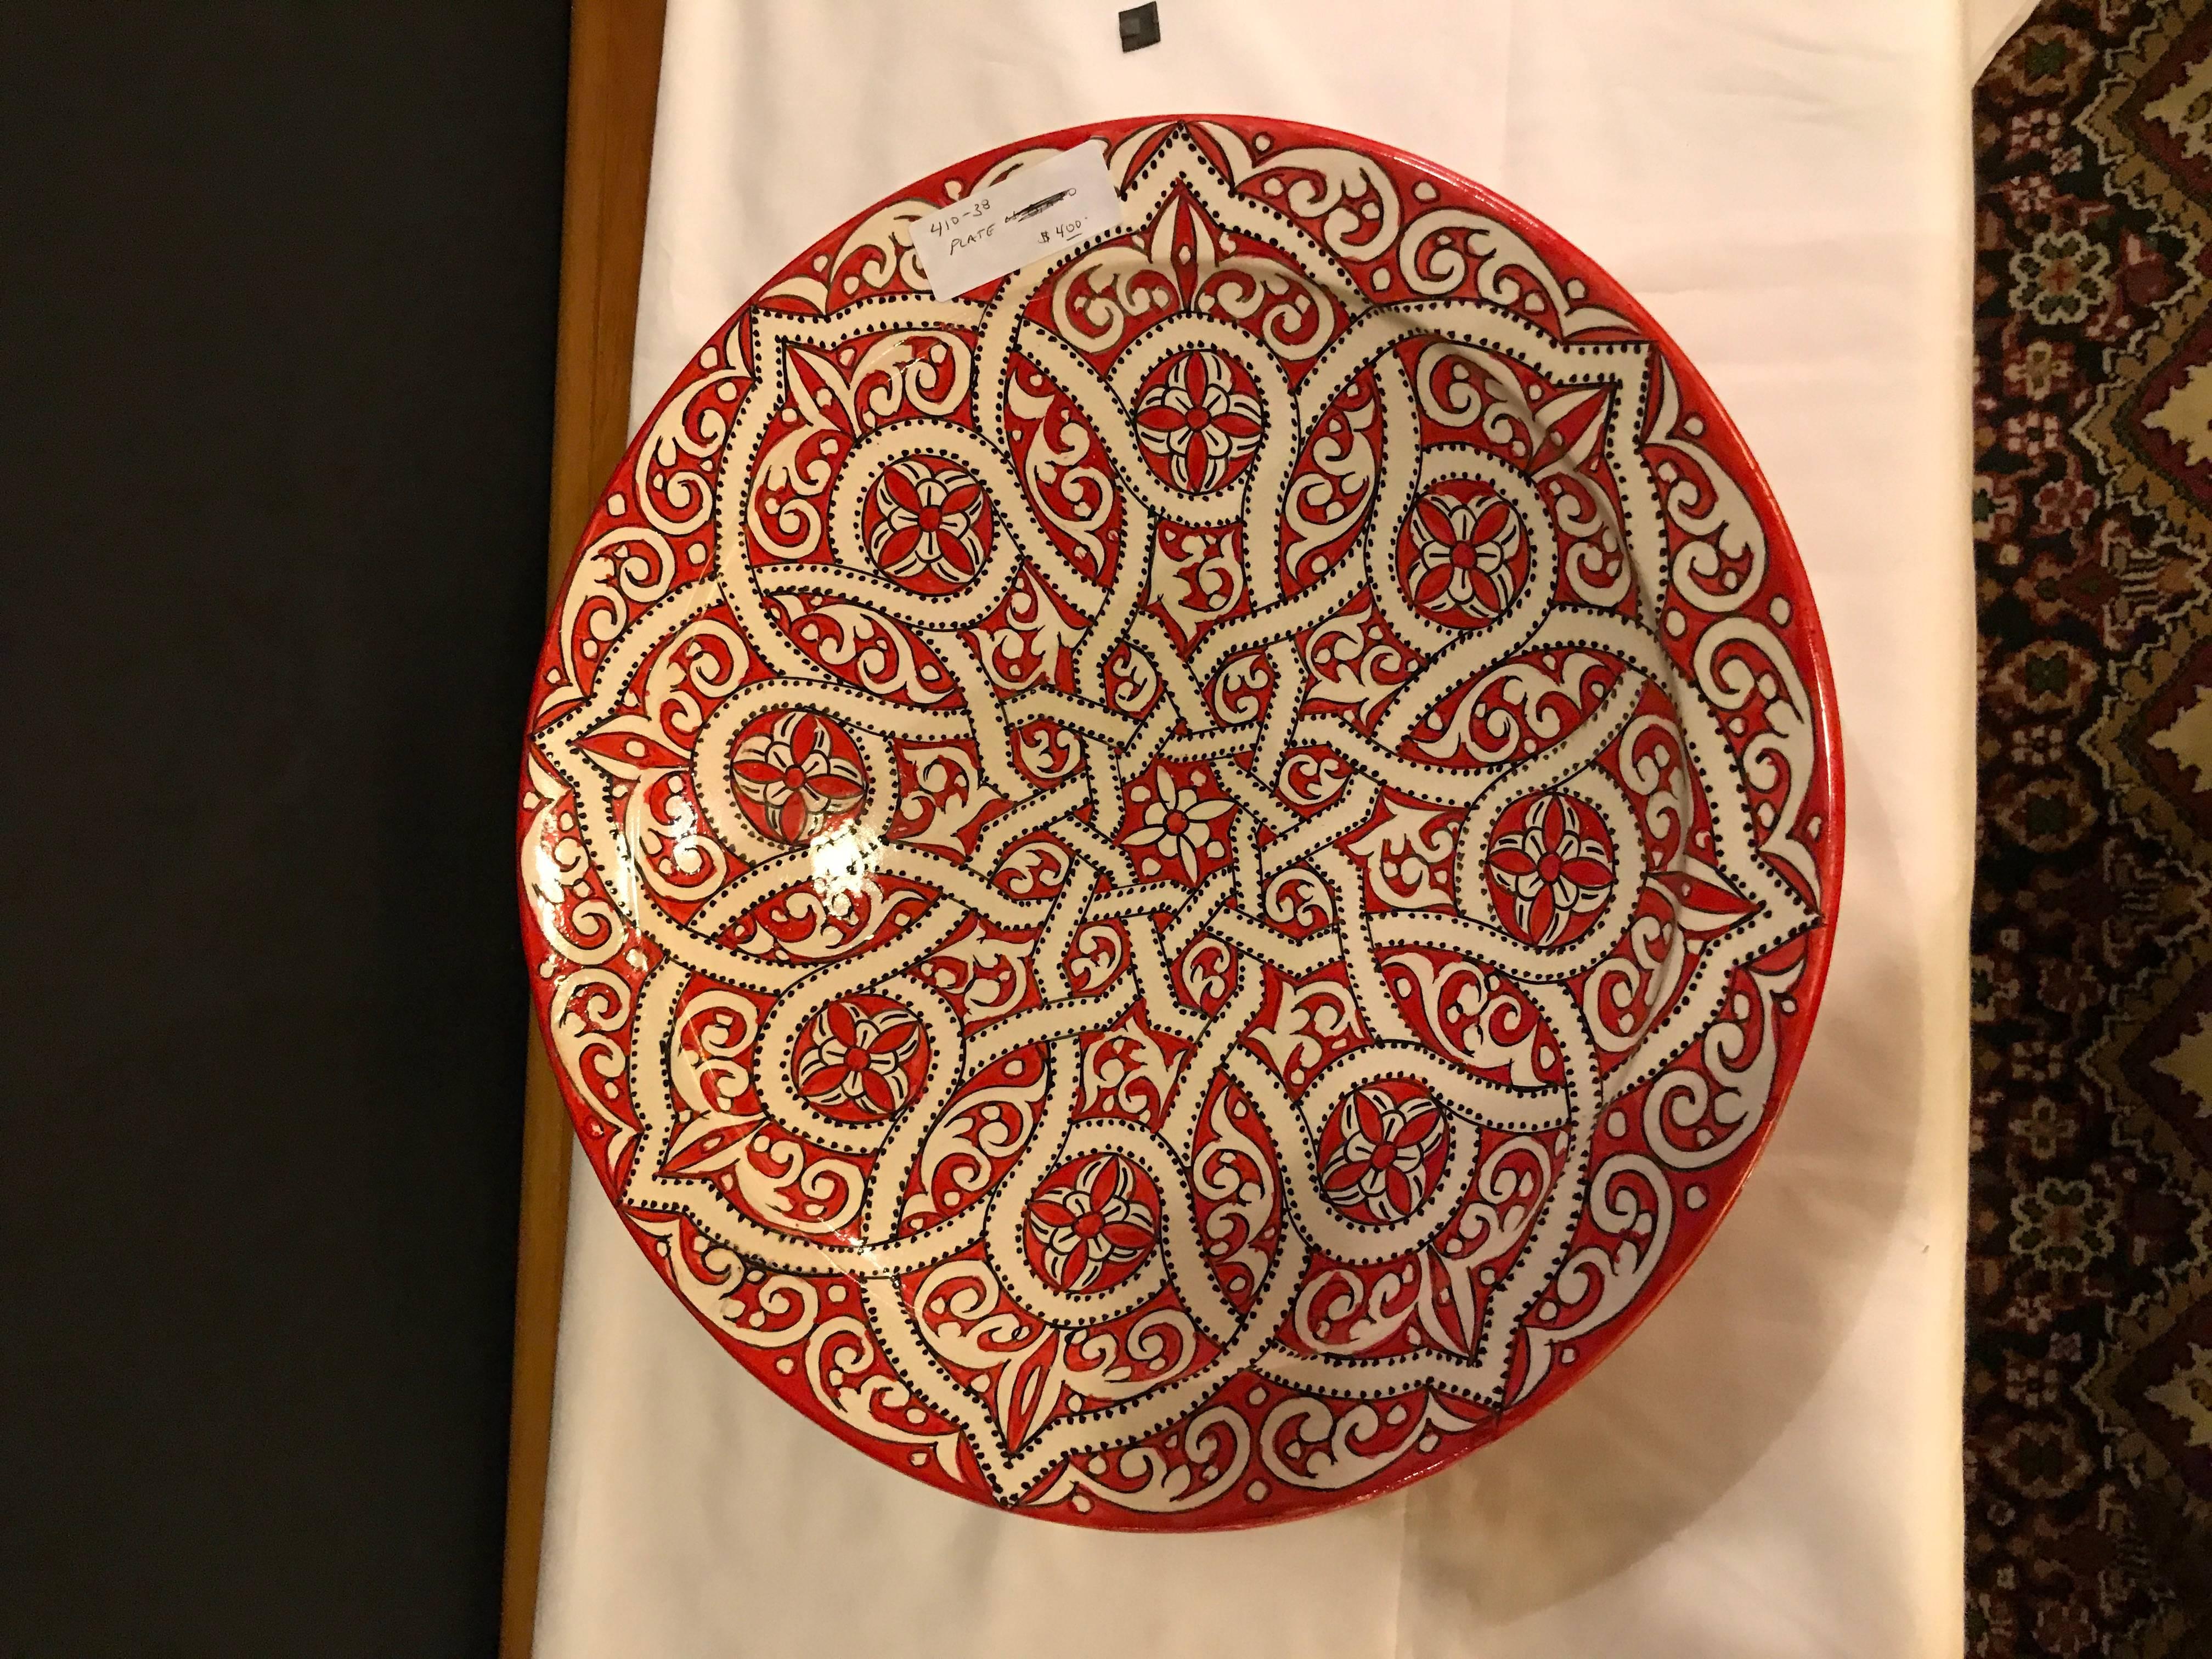 With a beautiful arabesque design hand-painted in cherry red and white, this gorgeous, large-size ceramic dinner plate possesses a truly exotic look. Handcrafted in the bustling workshops of master artisans in the coastal city of Safi, this lovely